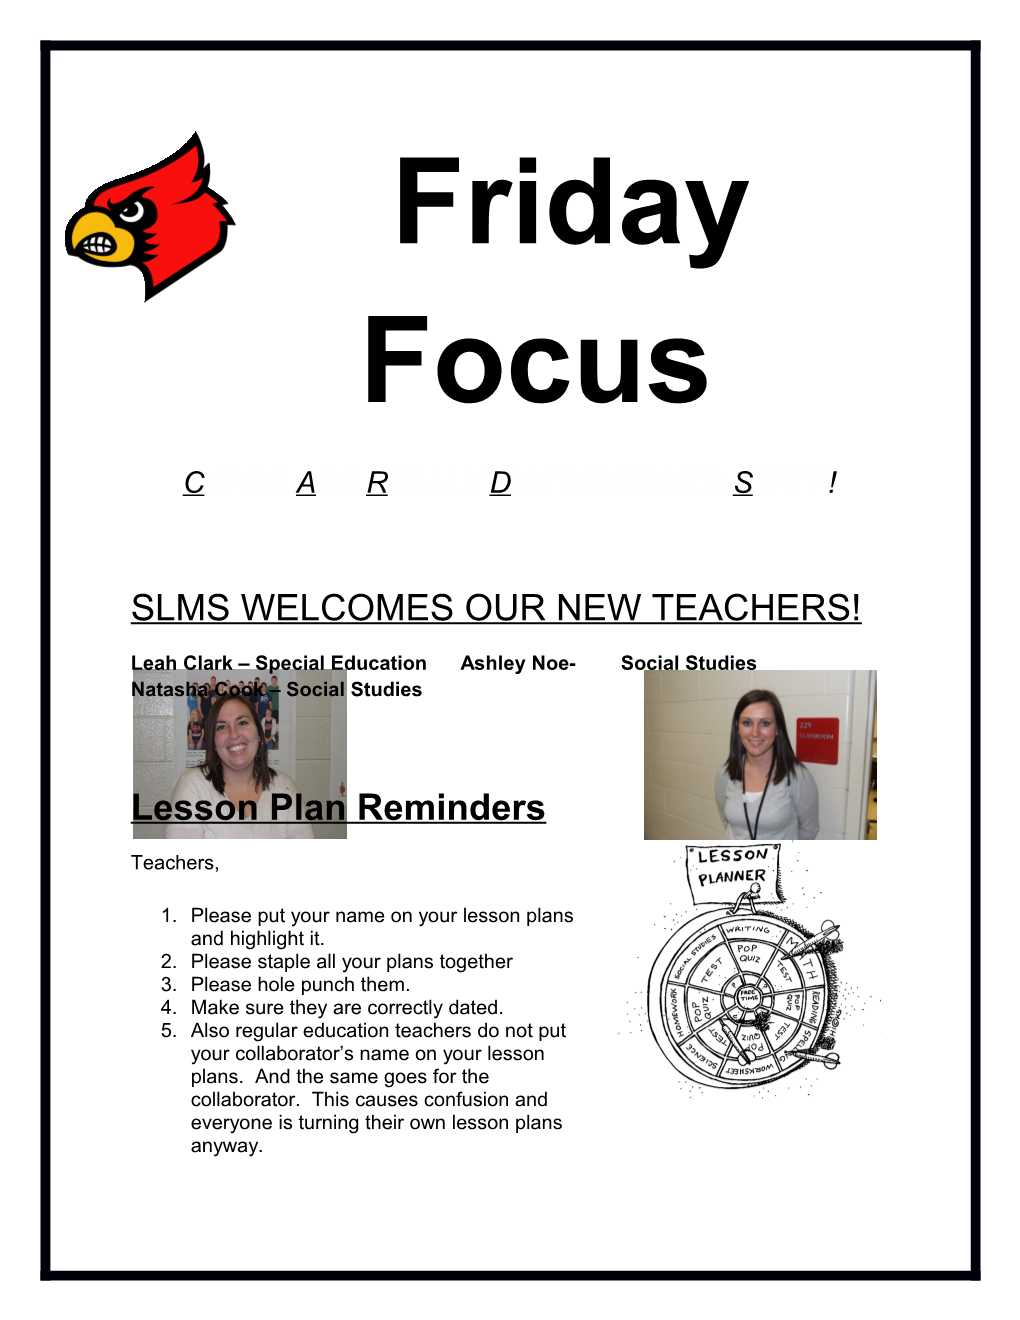 Cards Are Really Distinguished Staff!